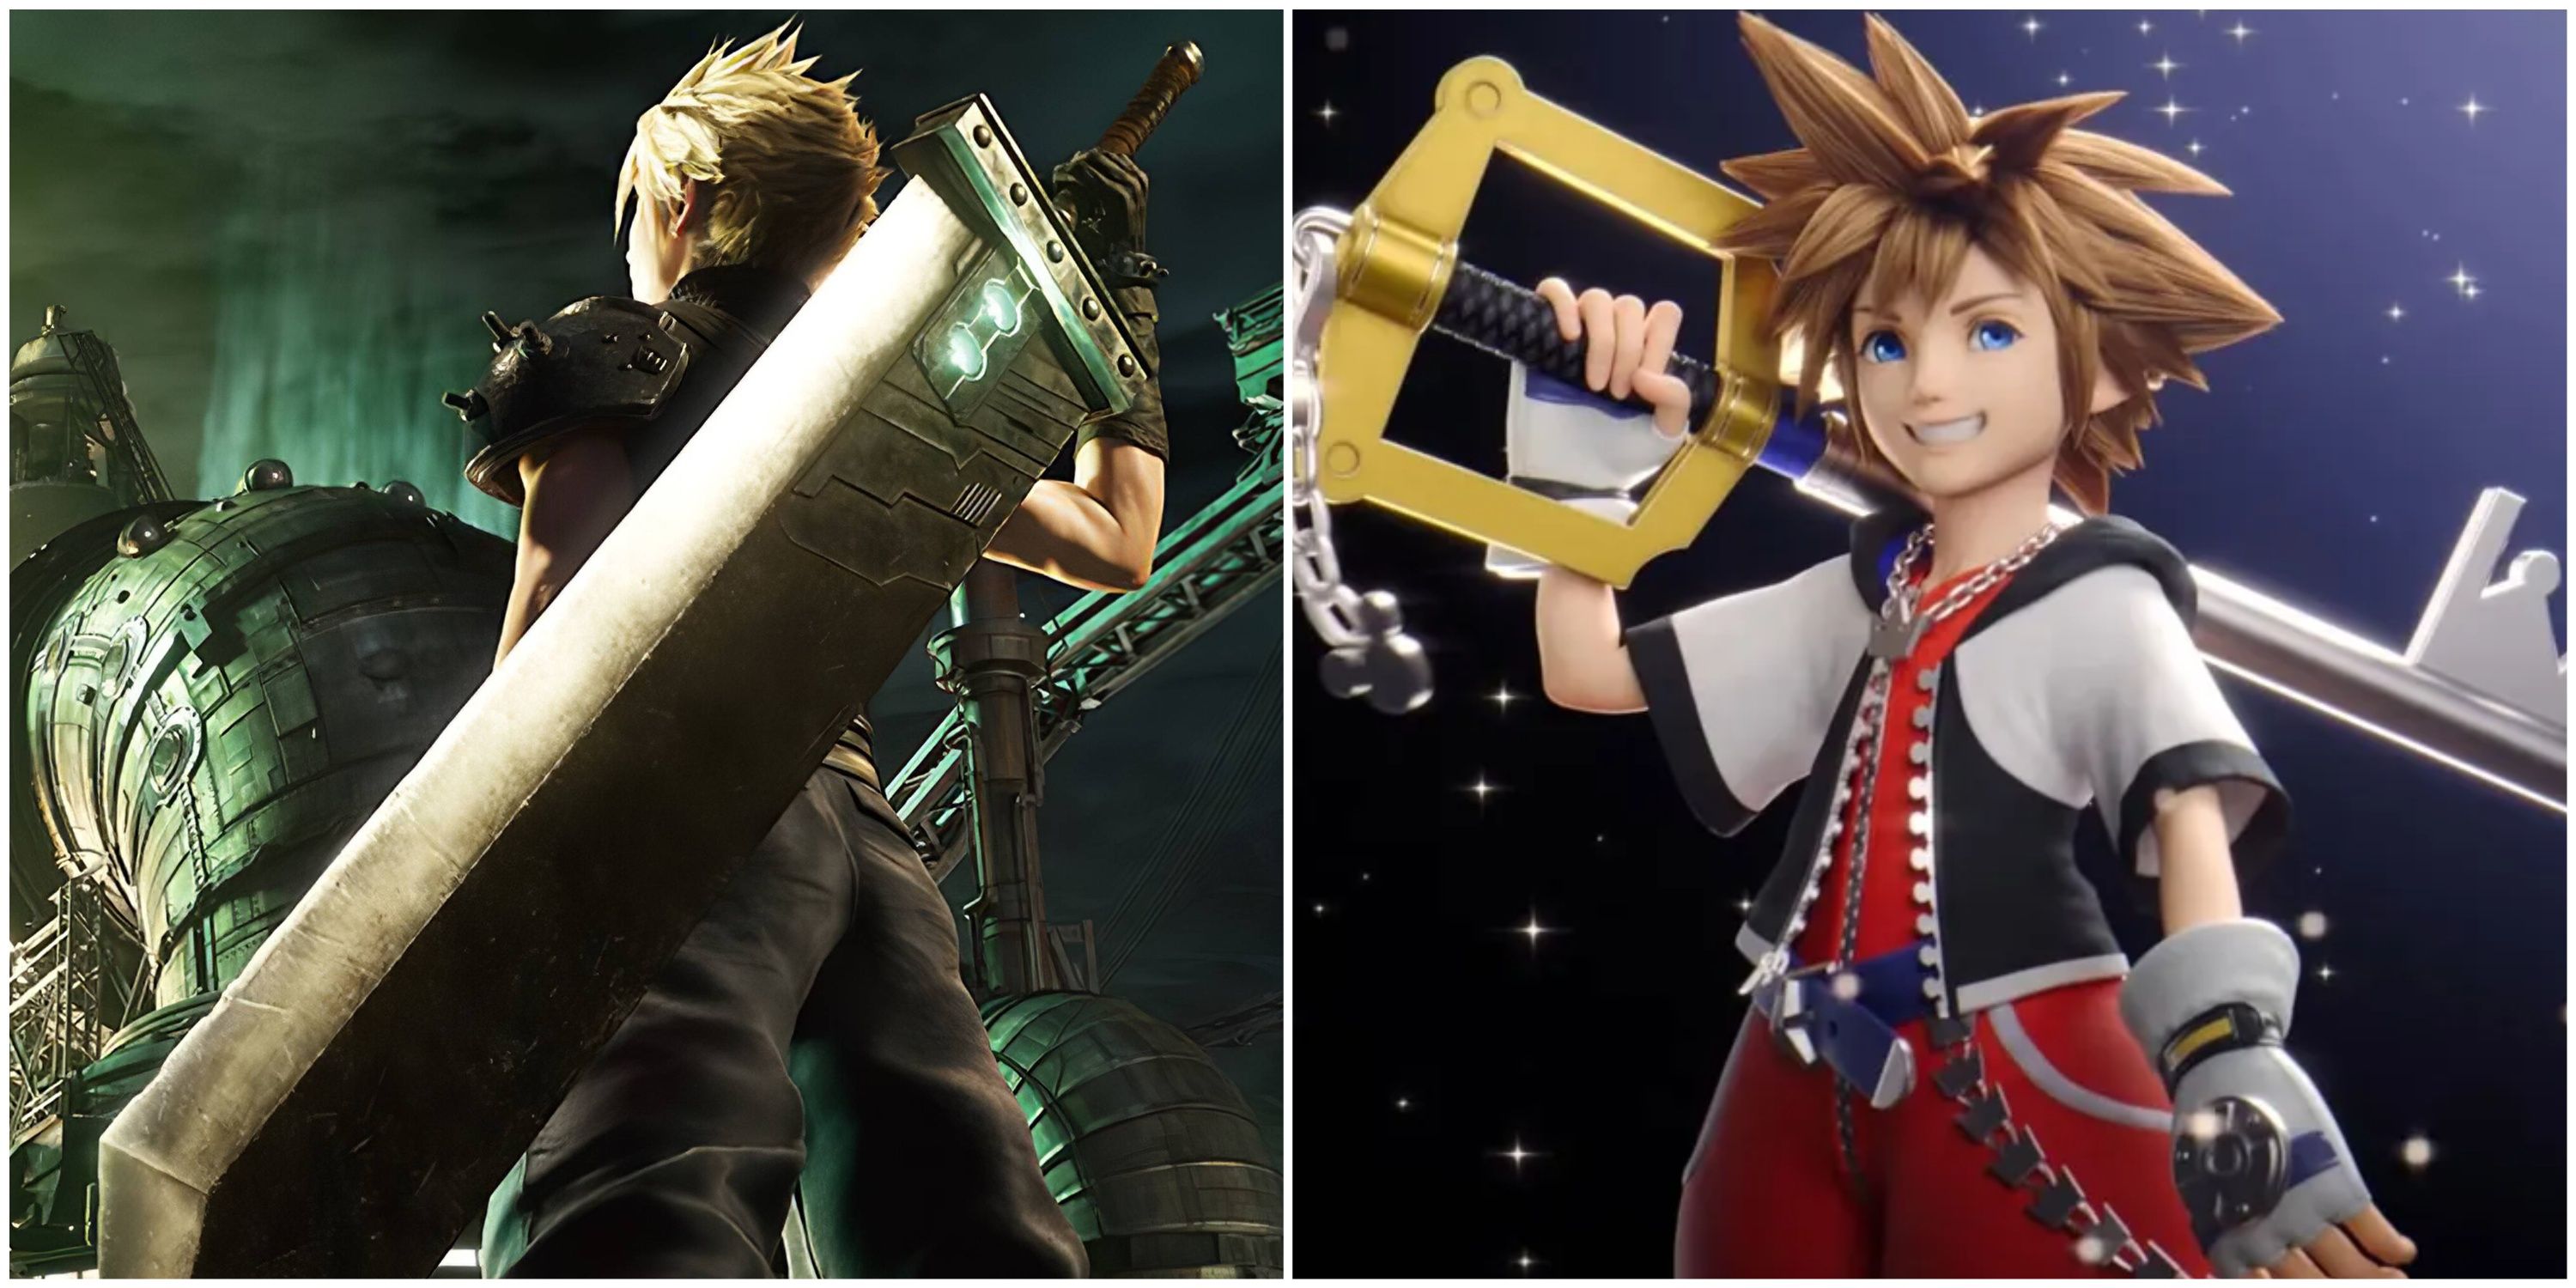 The Buster Sword in Final Fantasy 7 Remake and the Kingdom Key in Super Smash Bros. Ultimate